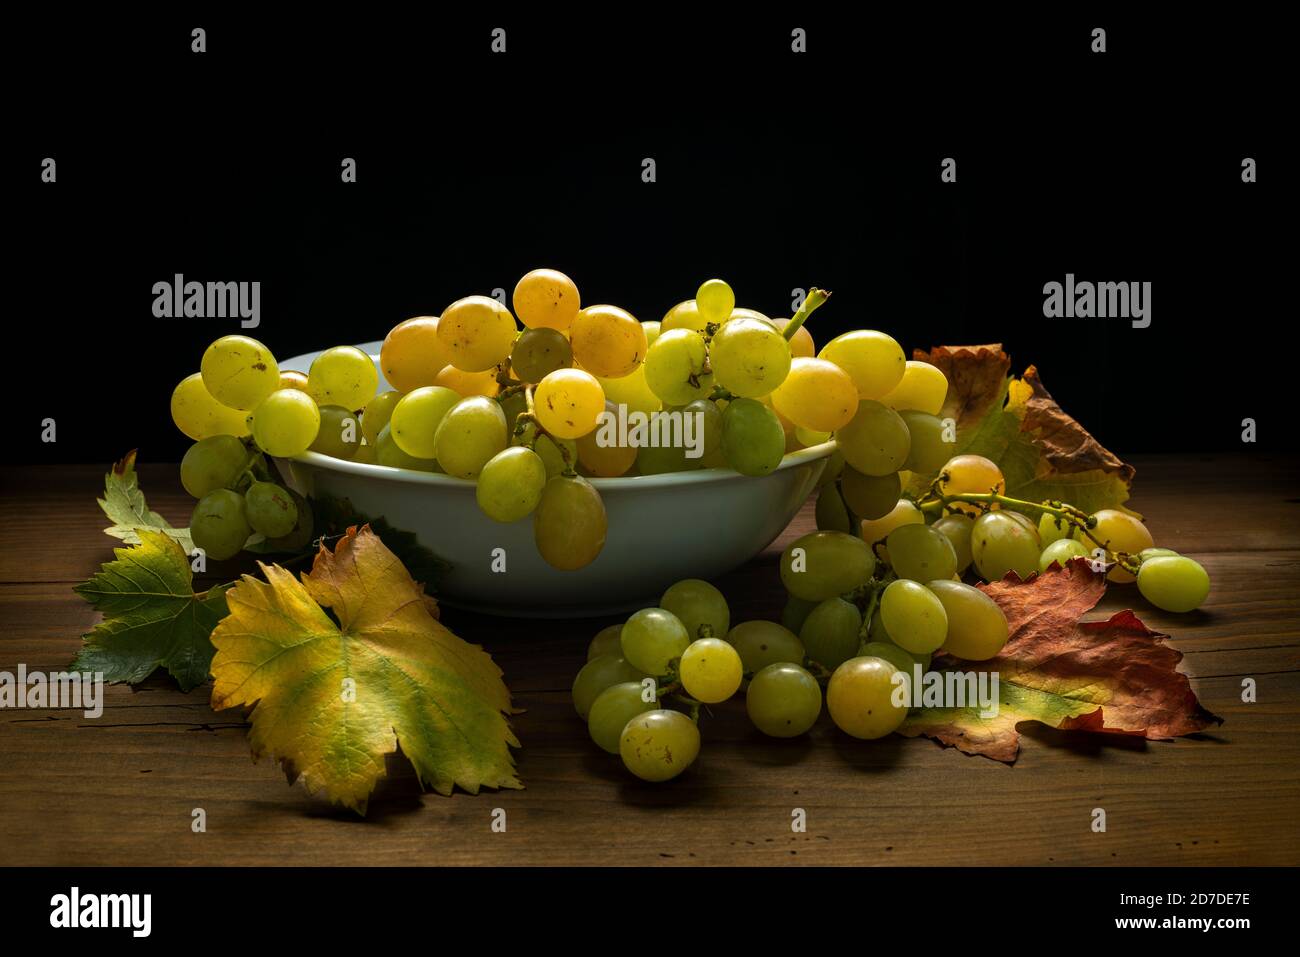 Ripe bunch of organic table grapes, placed on a table with a black background. Abruzzo, Italy Stock Photo